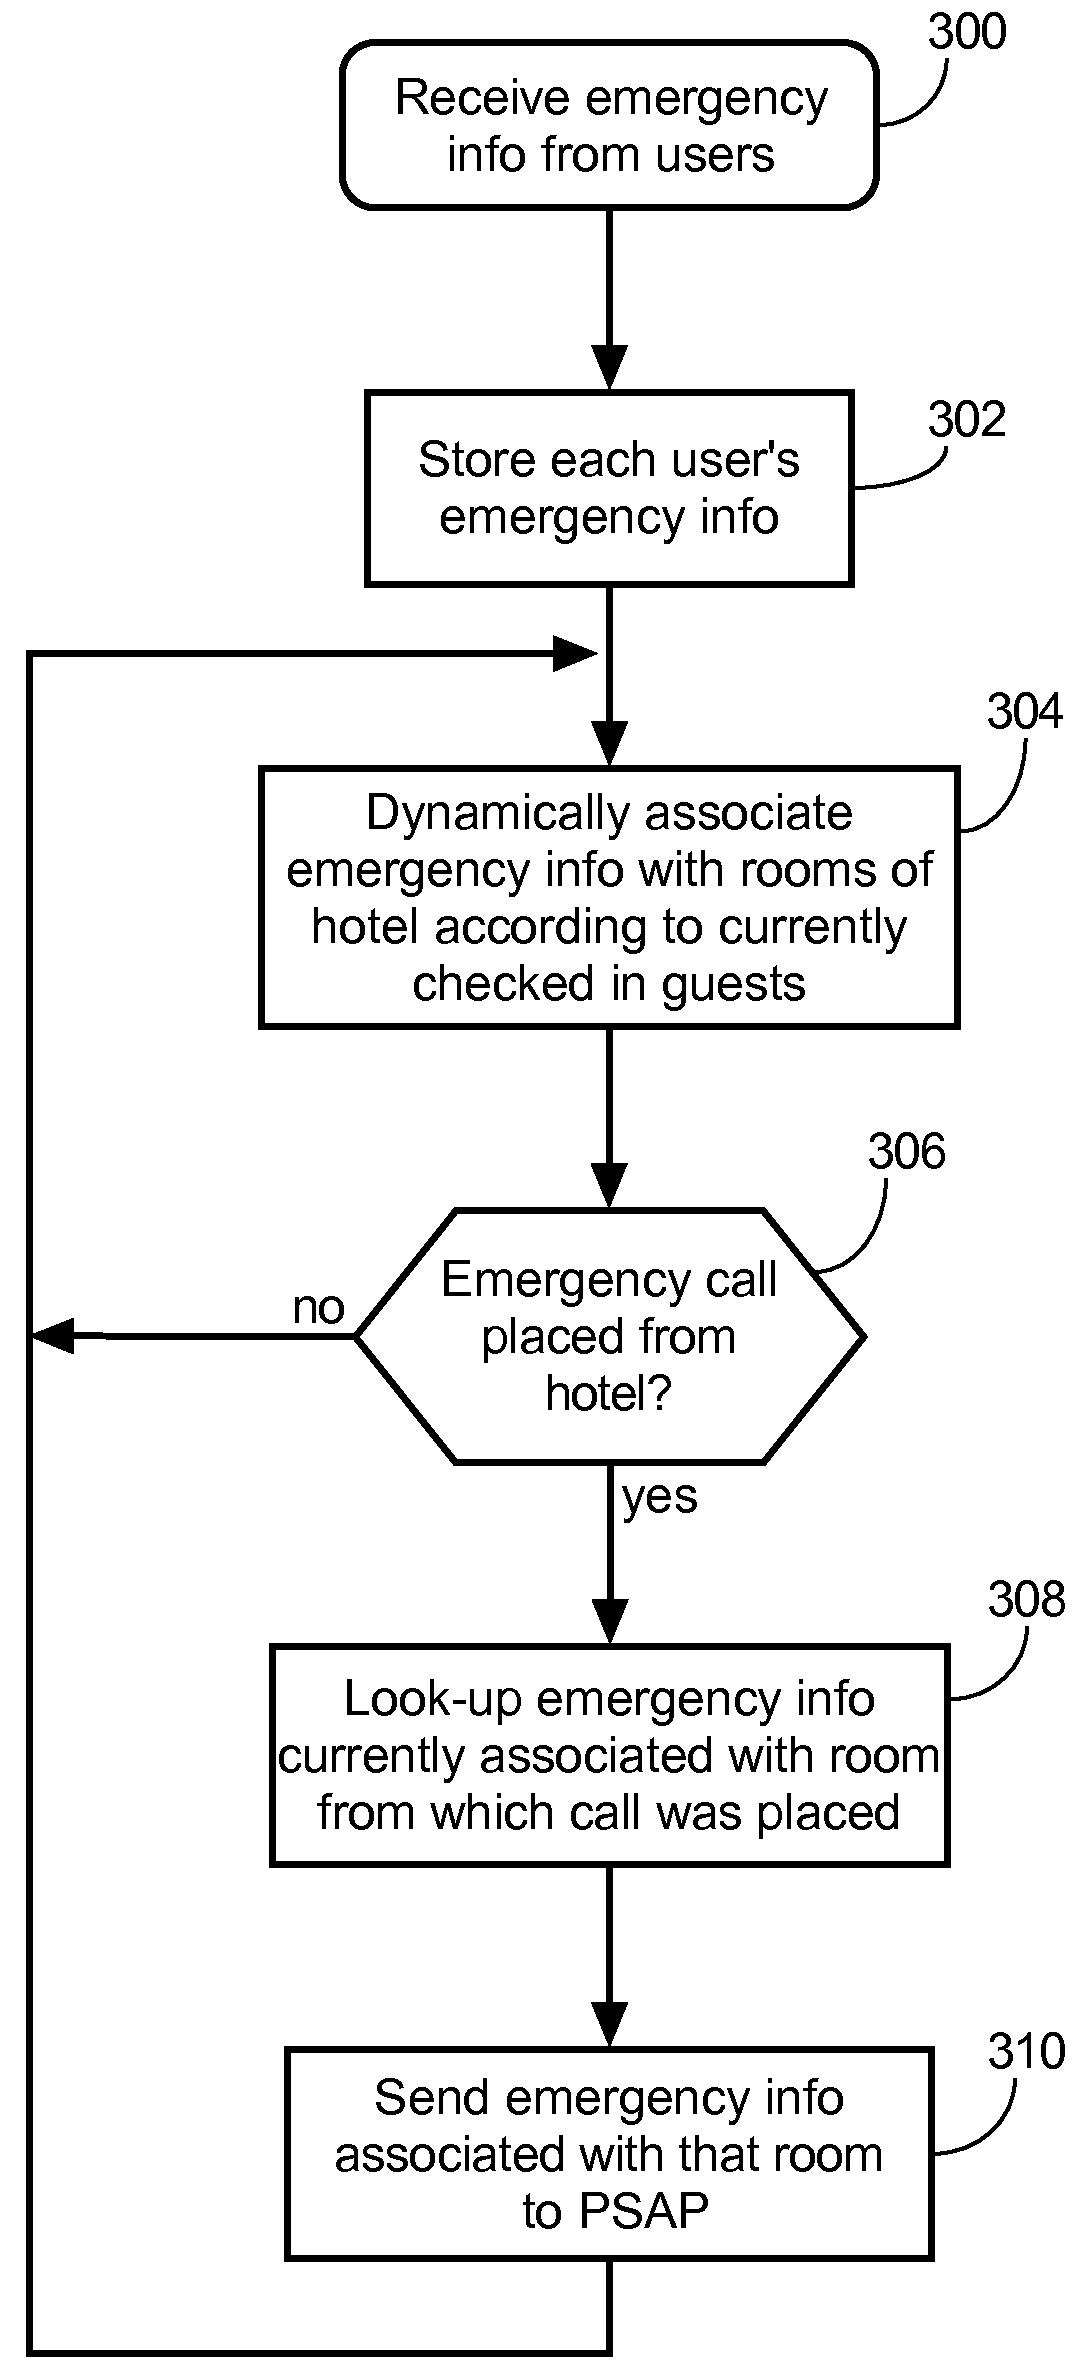 Providing to a public-safety answering point emergency information associated with an emergency call